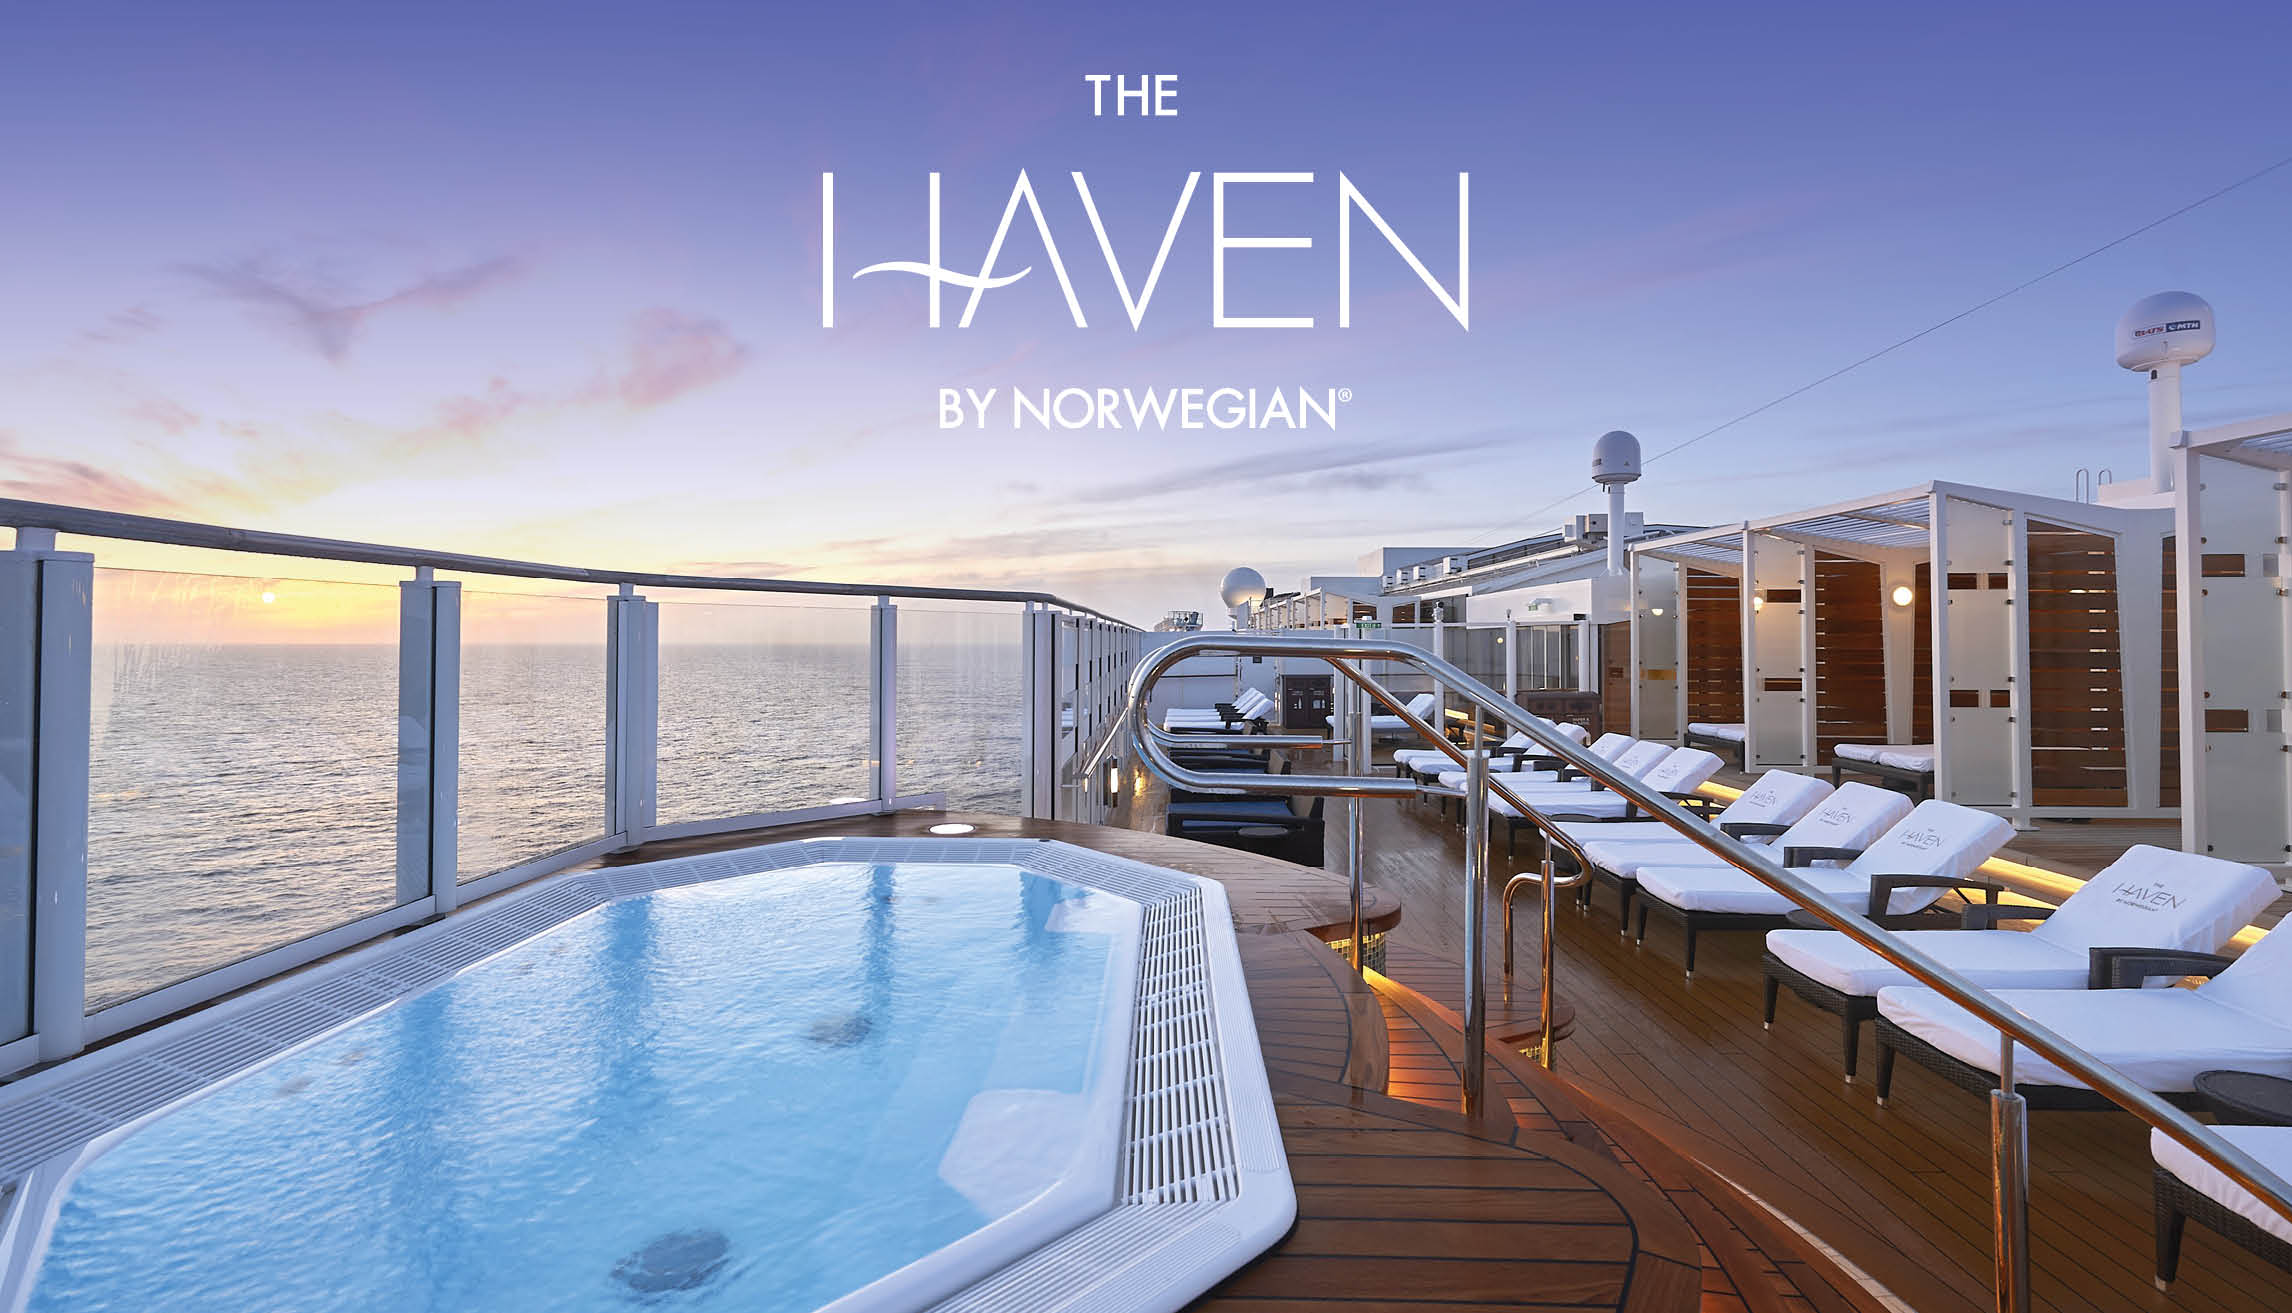 The Haven, by Norwegian Cruise Line